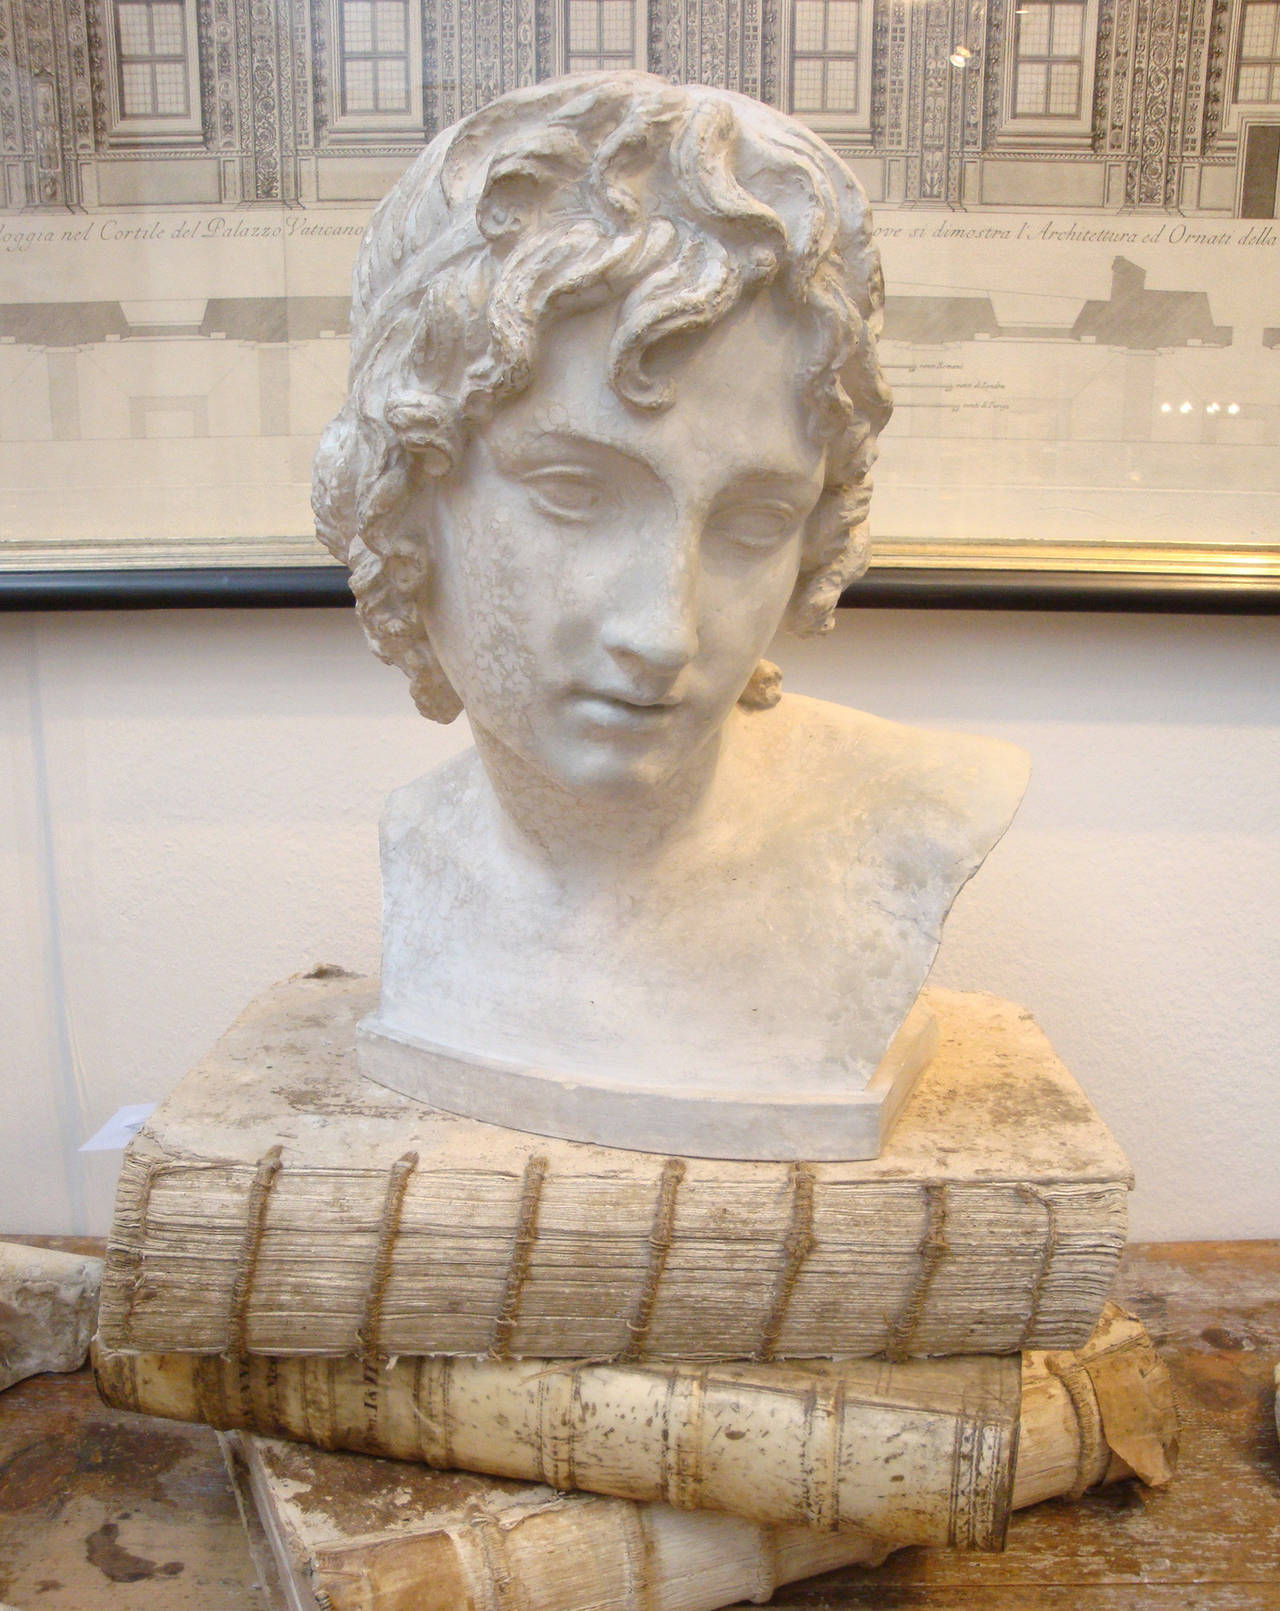 19th century plaster bust of a young Alexander the Great. It has a plaque on the back showing that it was in the Thorvaldsen Museum in Copenhagen. In the 19th century important Greek and Roman statues were often copied to be sent to museums